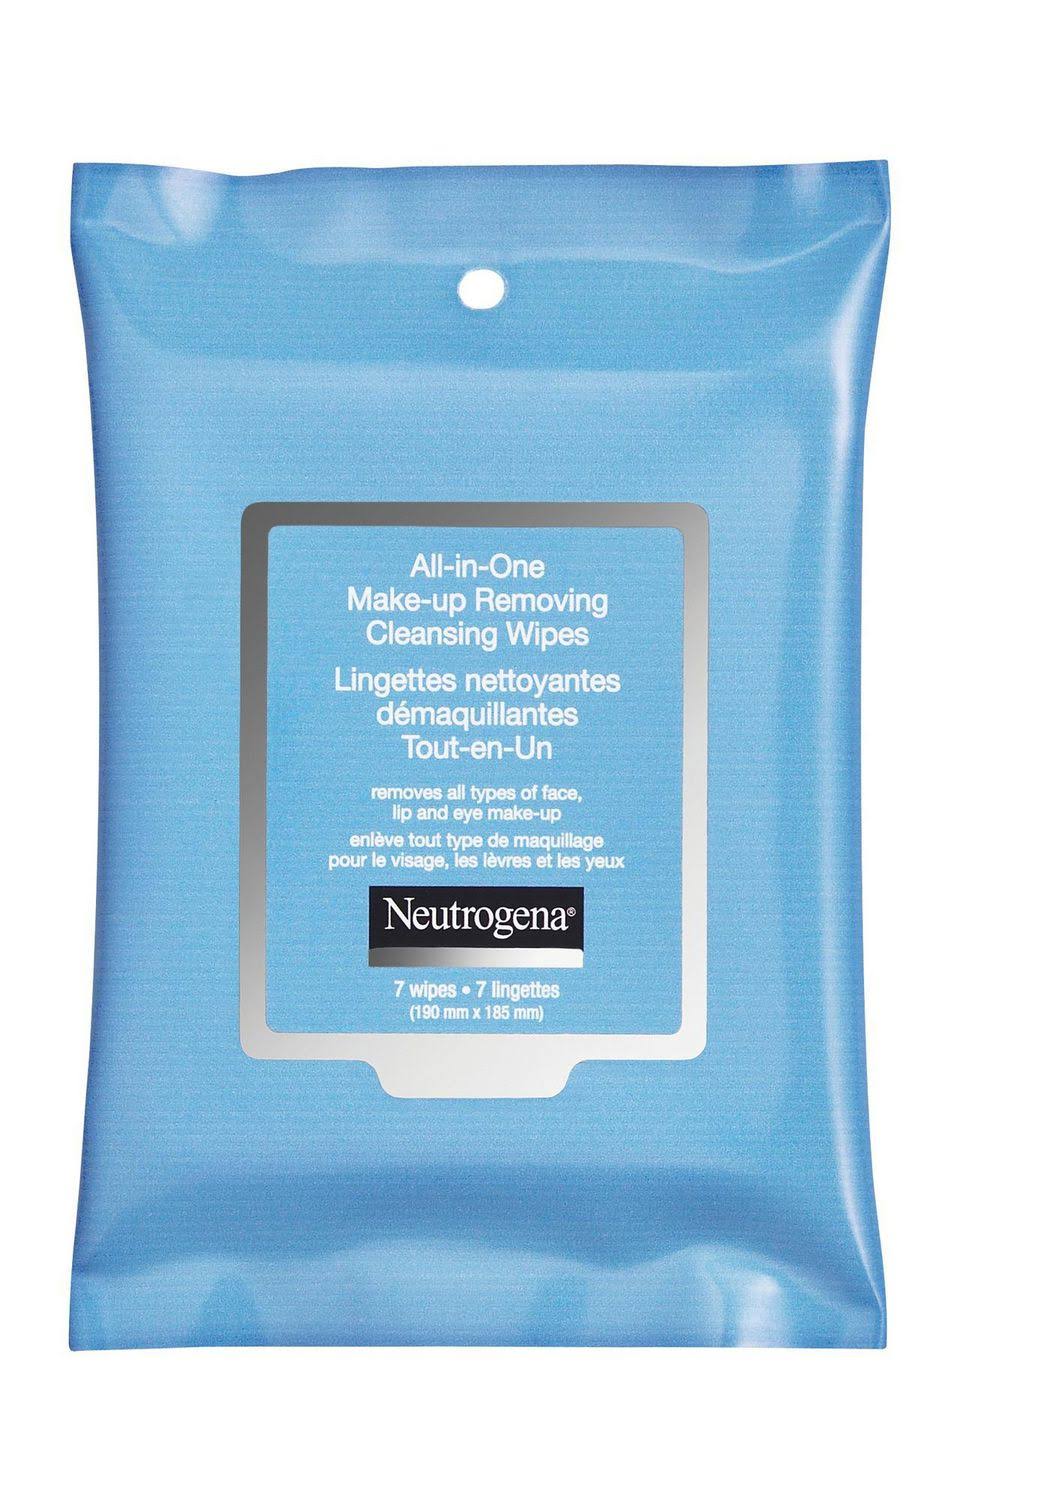 Neutrogena All-in-one Make-up Removing Cleansing Wipes - 7 Wipes